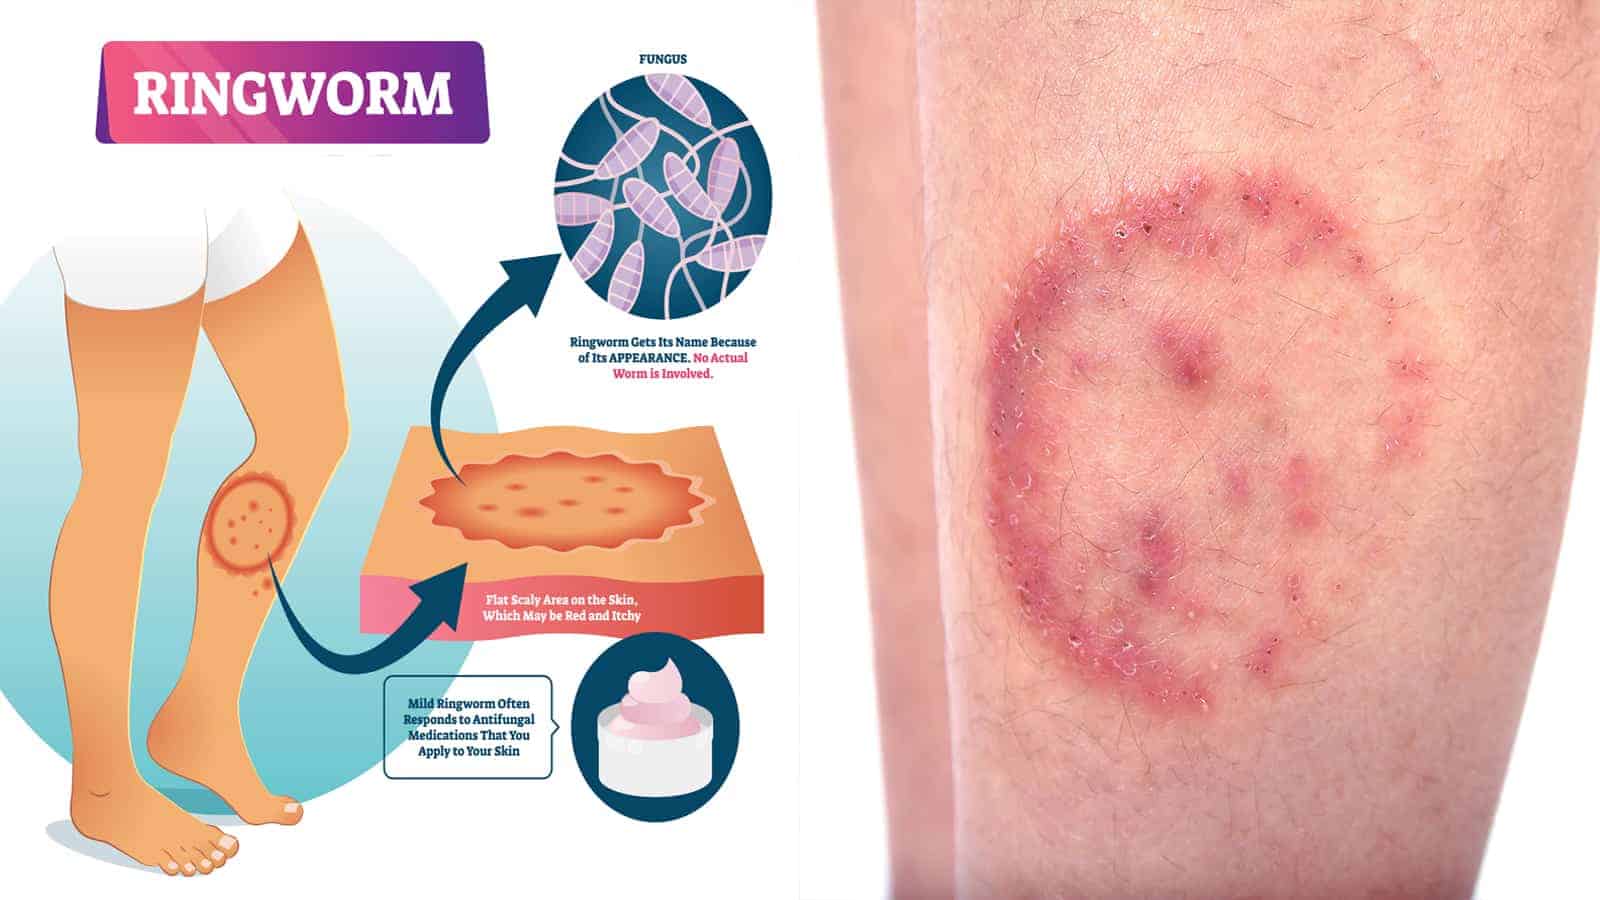 Ringworm Symptoms, Causes, and Treatments Never to Ignore